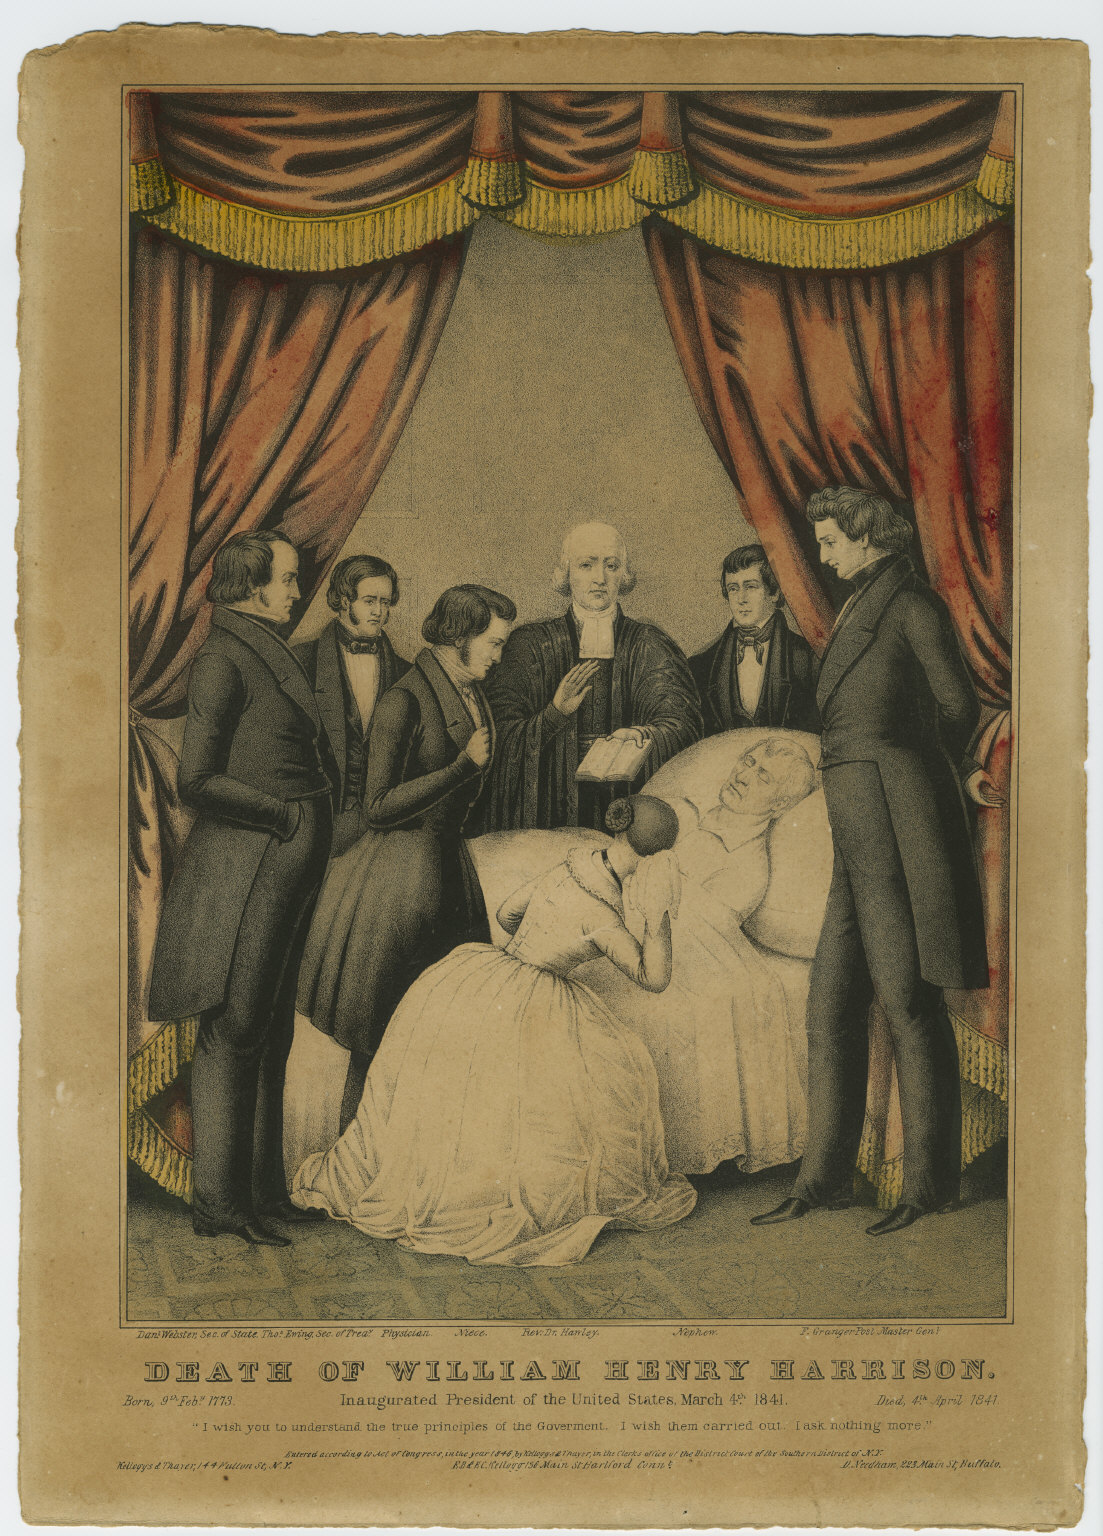 A woman depicted at President Harrison's deathbed a month after his inauguration may have been intended to portray his daughter Anna.